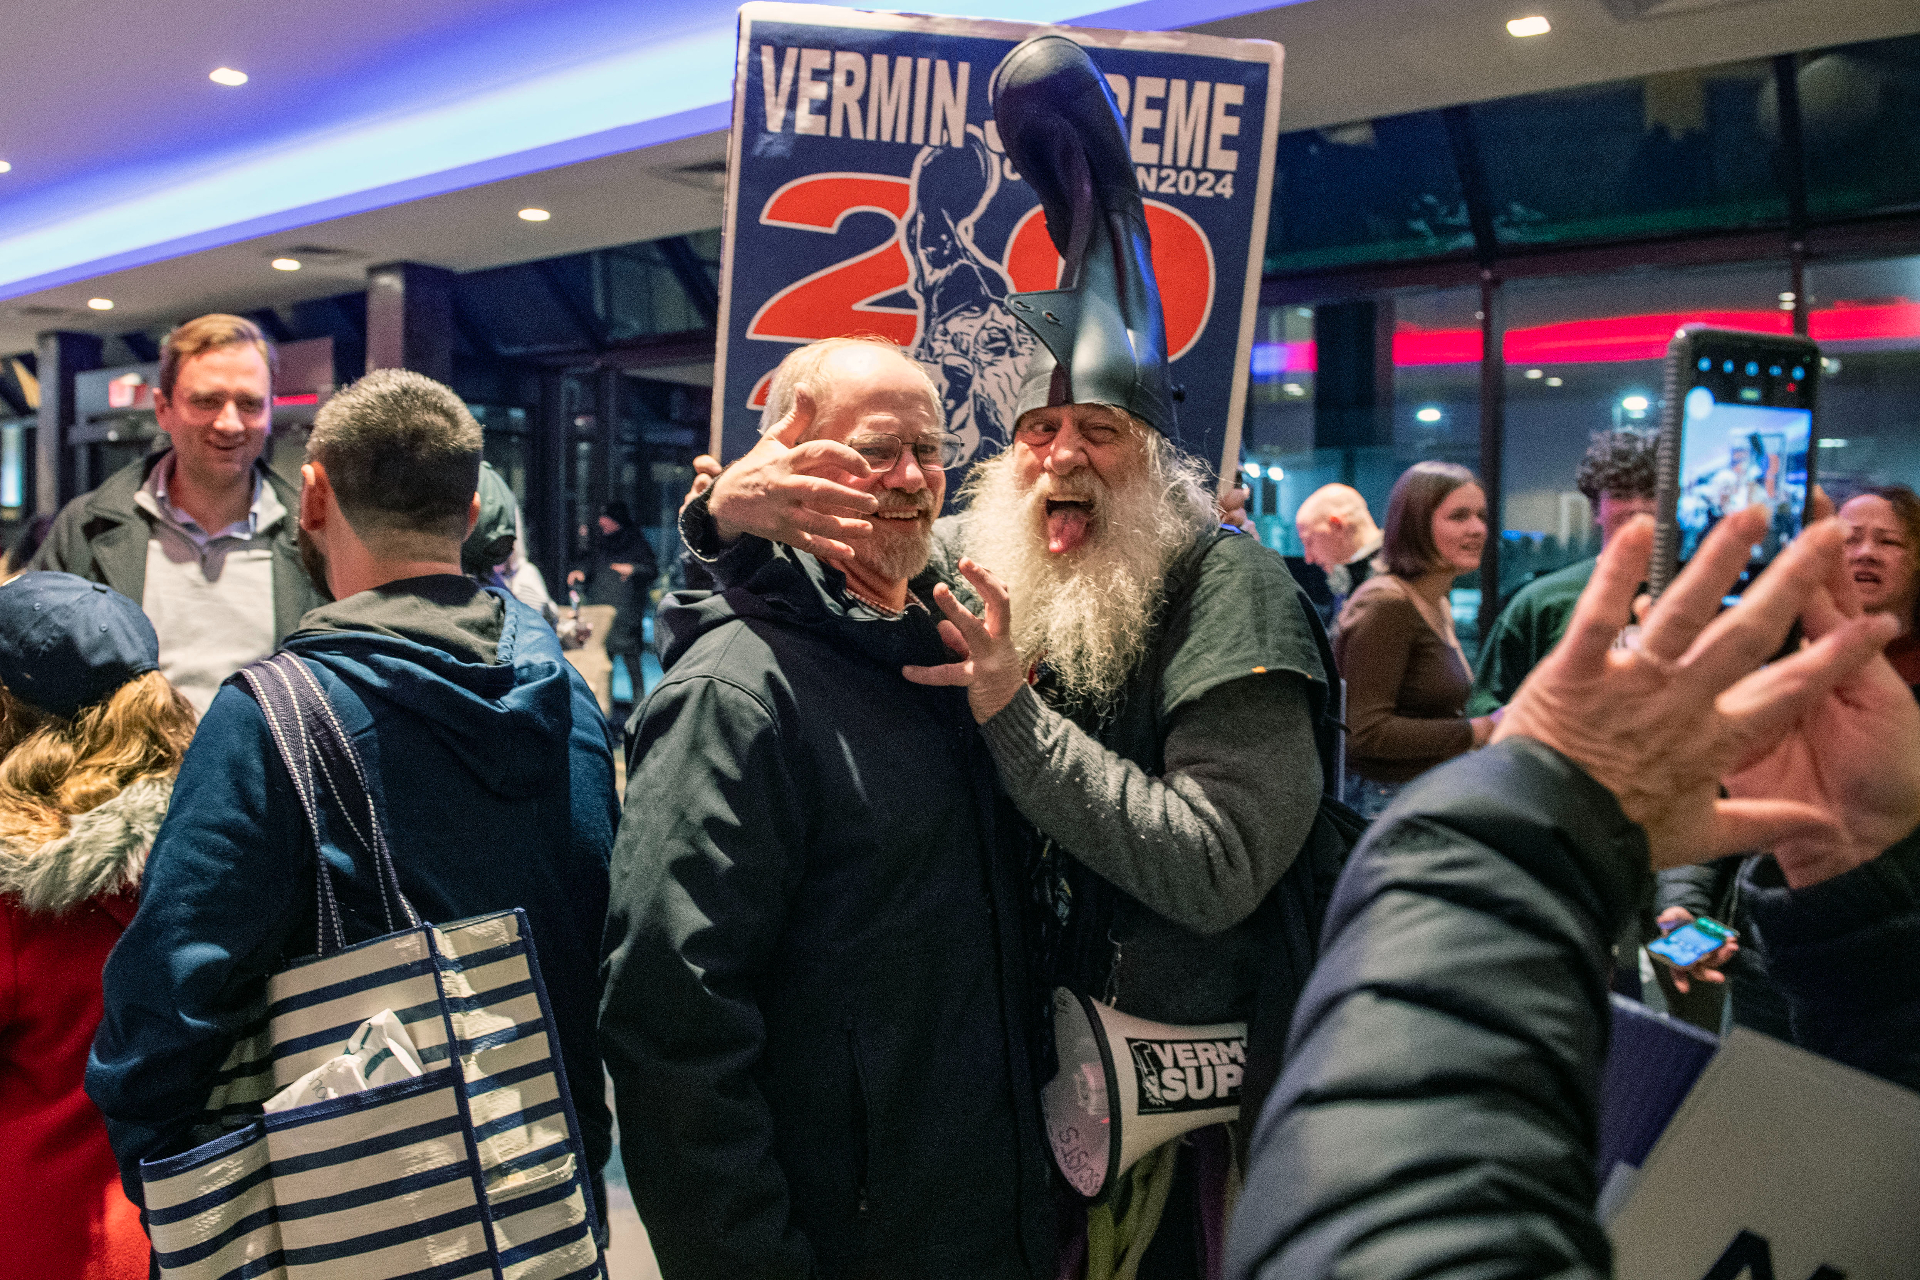 Vermin Supreme: the presidential candidate who wears a boot on his head